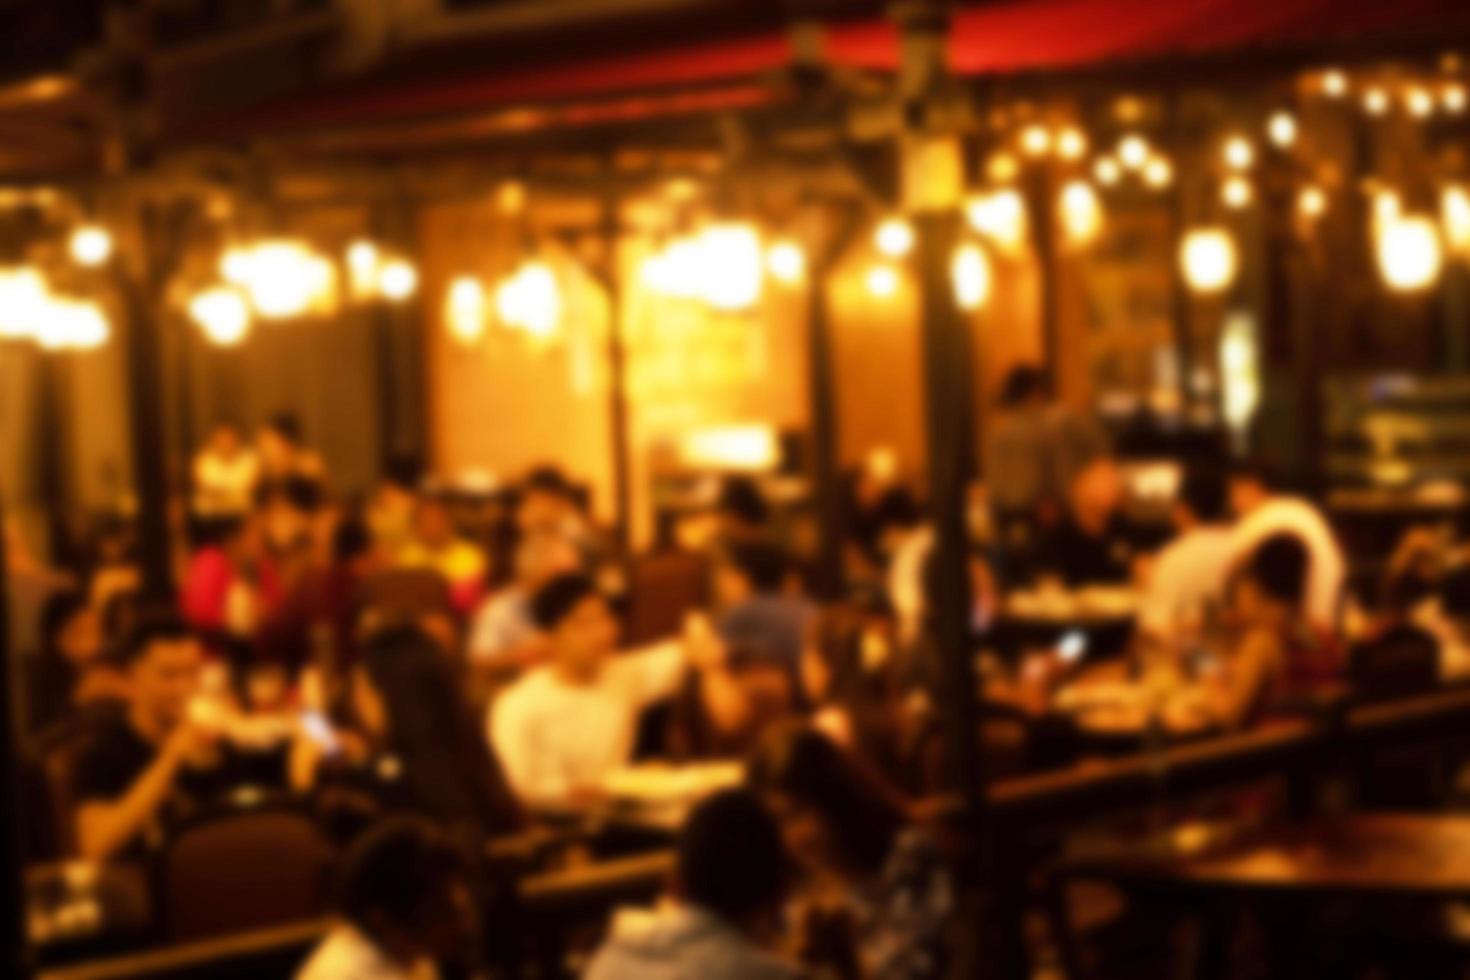 blurred image at the restaurant night time, many people in the restaurant eat and party happy relaxing photo